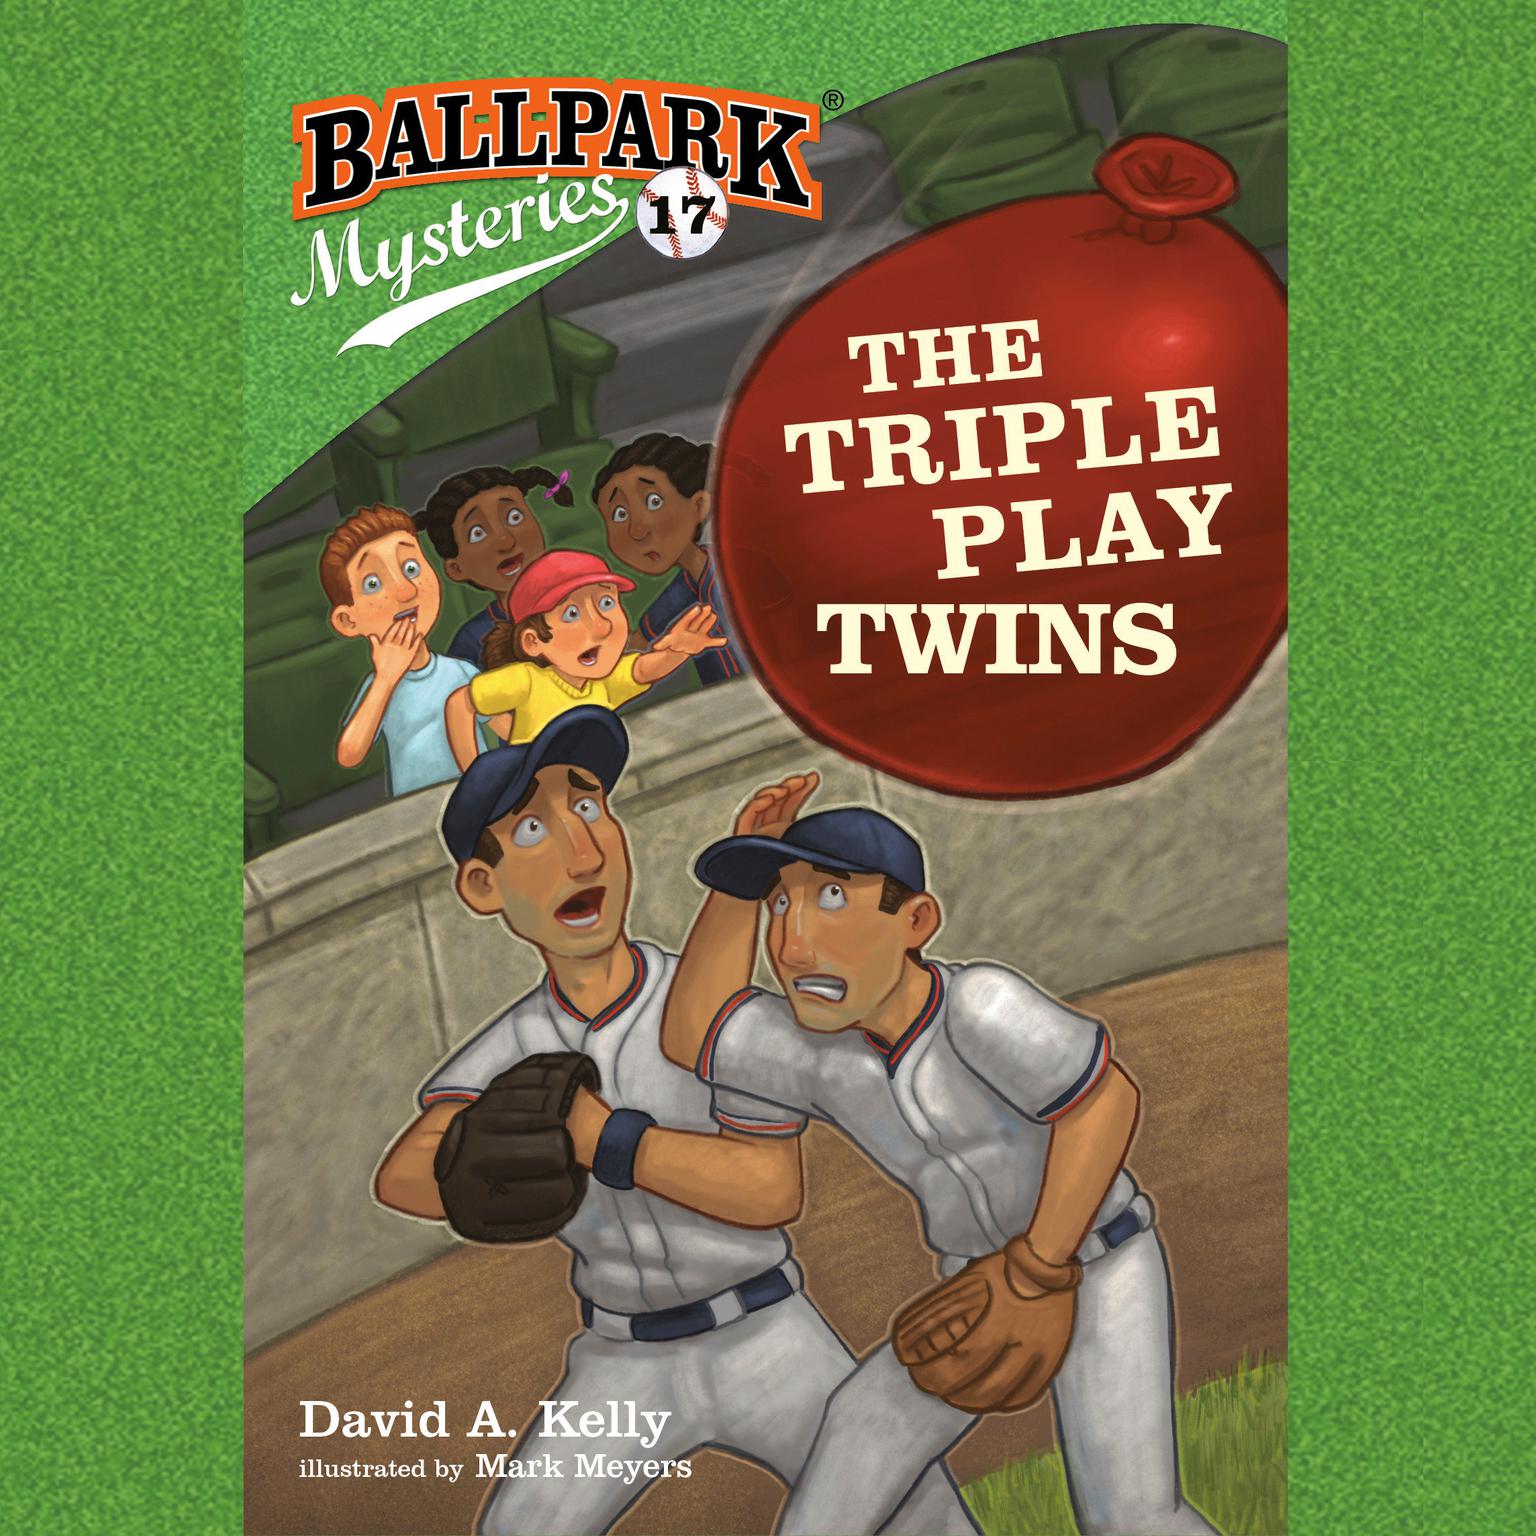 Ballpark Mysteries #17: The Triple Play Twins Audiobook, by David A. Kelly